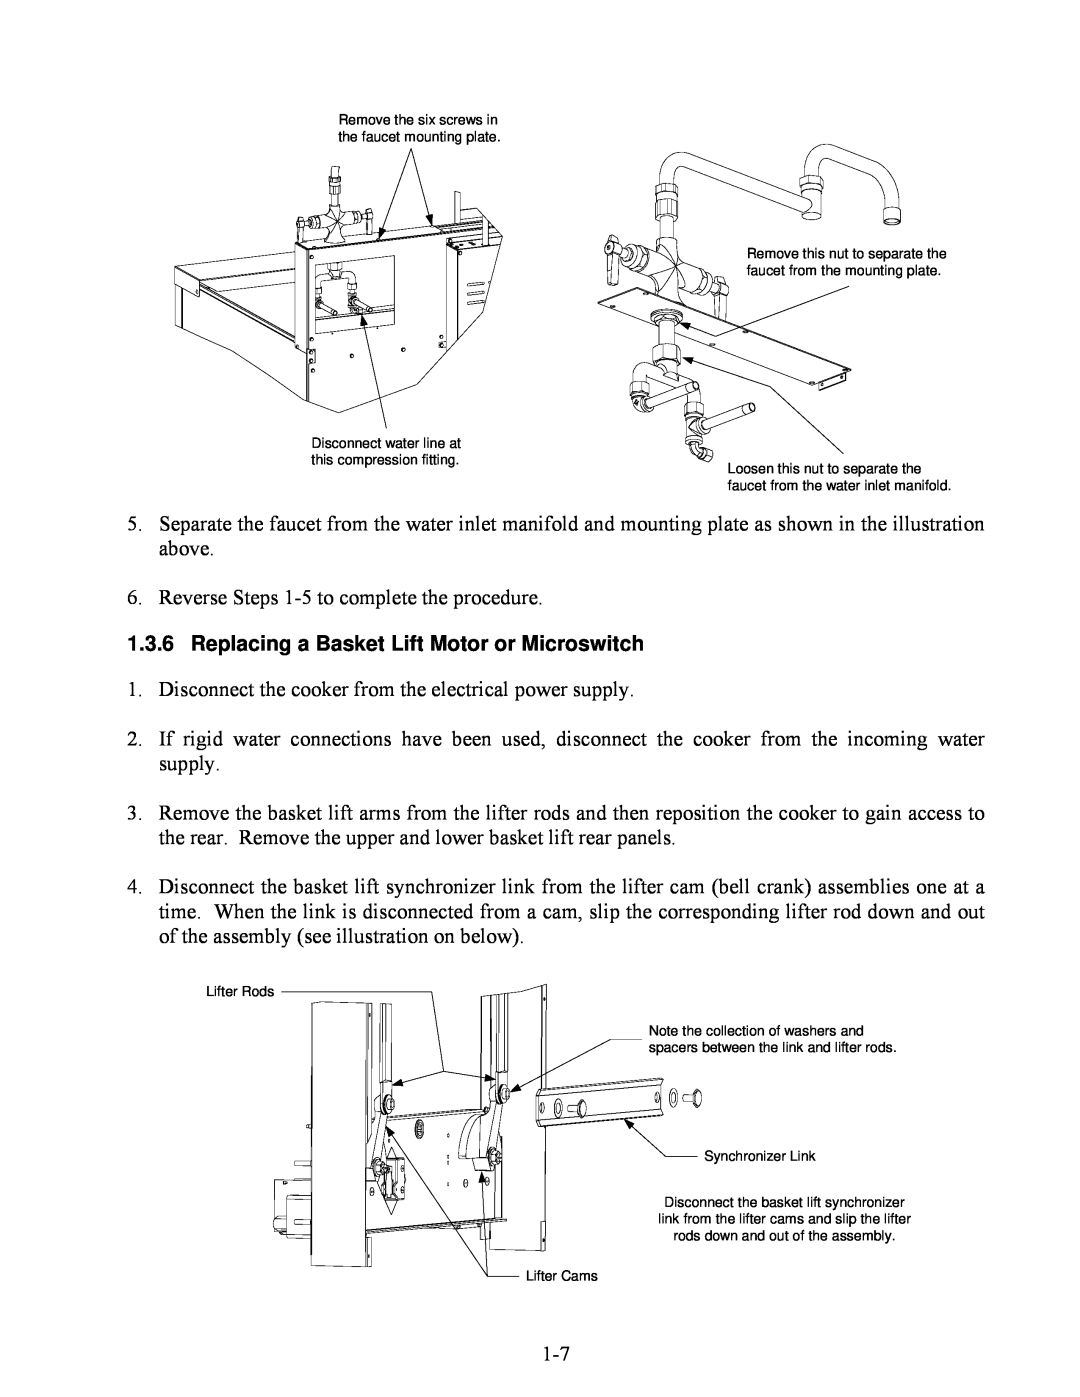 Frymaster 8196692 manual Reverse Steps 1-5to complete the procedure 